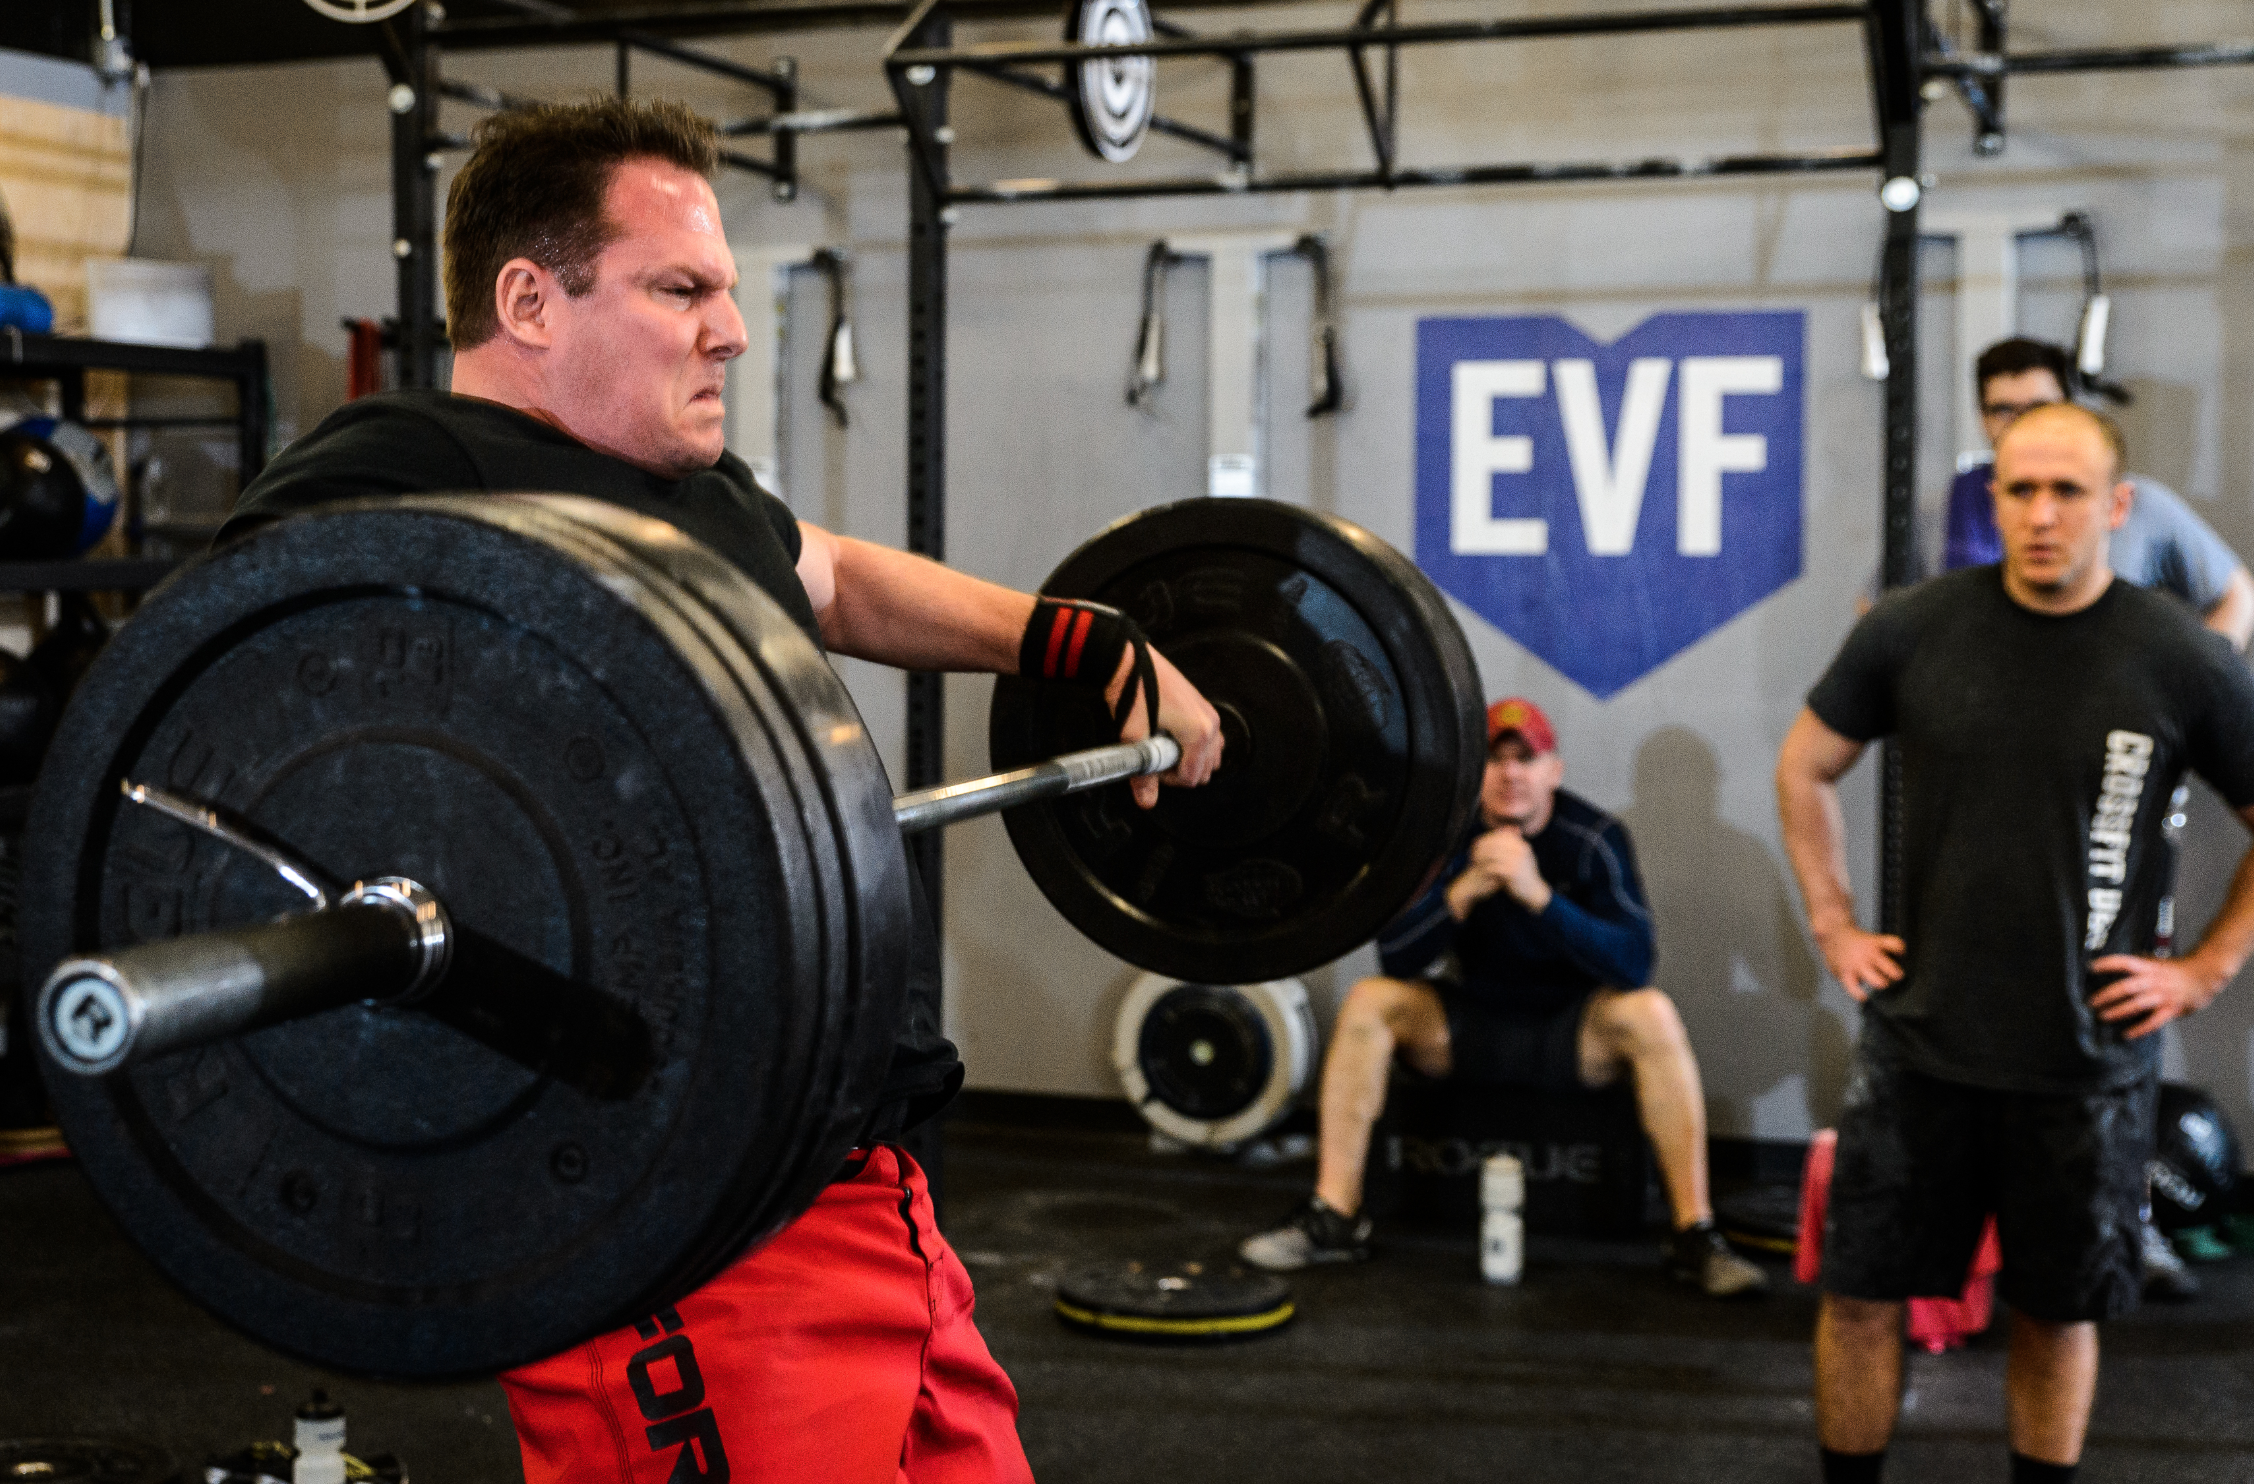 EVF Performance | Monday, Sept. 19 CrossFit Workout of the Day